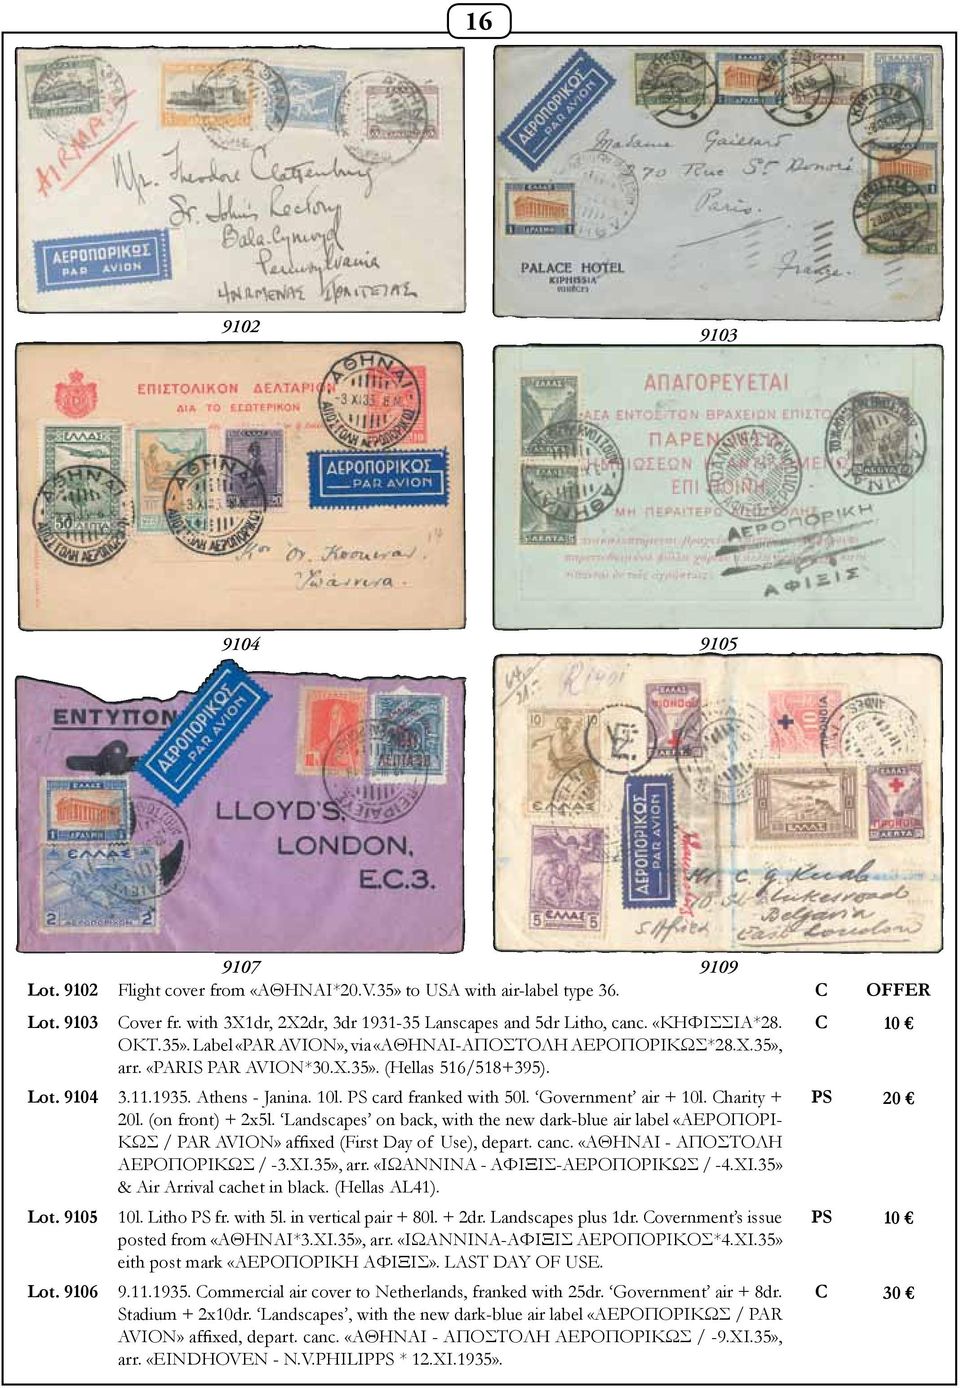 PS card franked with 50l. Government air + 10l. Charity + 20l. (on front) + 2x5l. Landscapes on back, with the new dark-blue air label «ΑΕΡΟΠΟΡΙ- ΚΩΣ / PAR AVION» affixed (First Day of Use), depart.